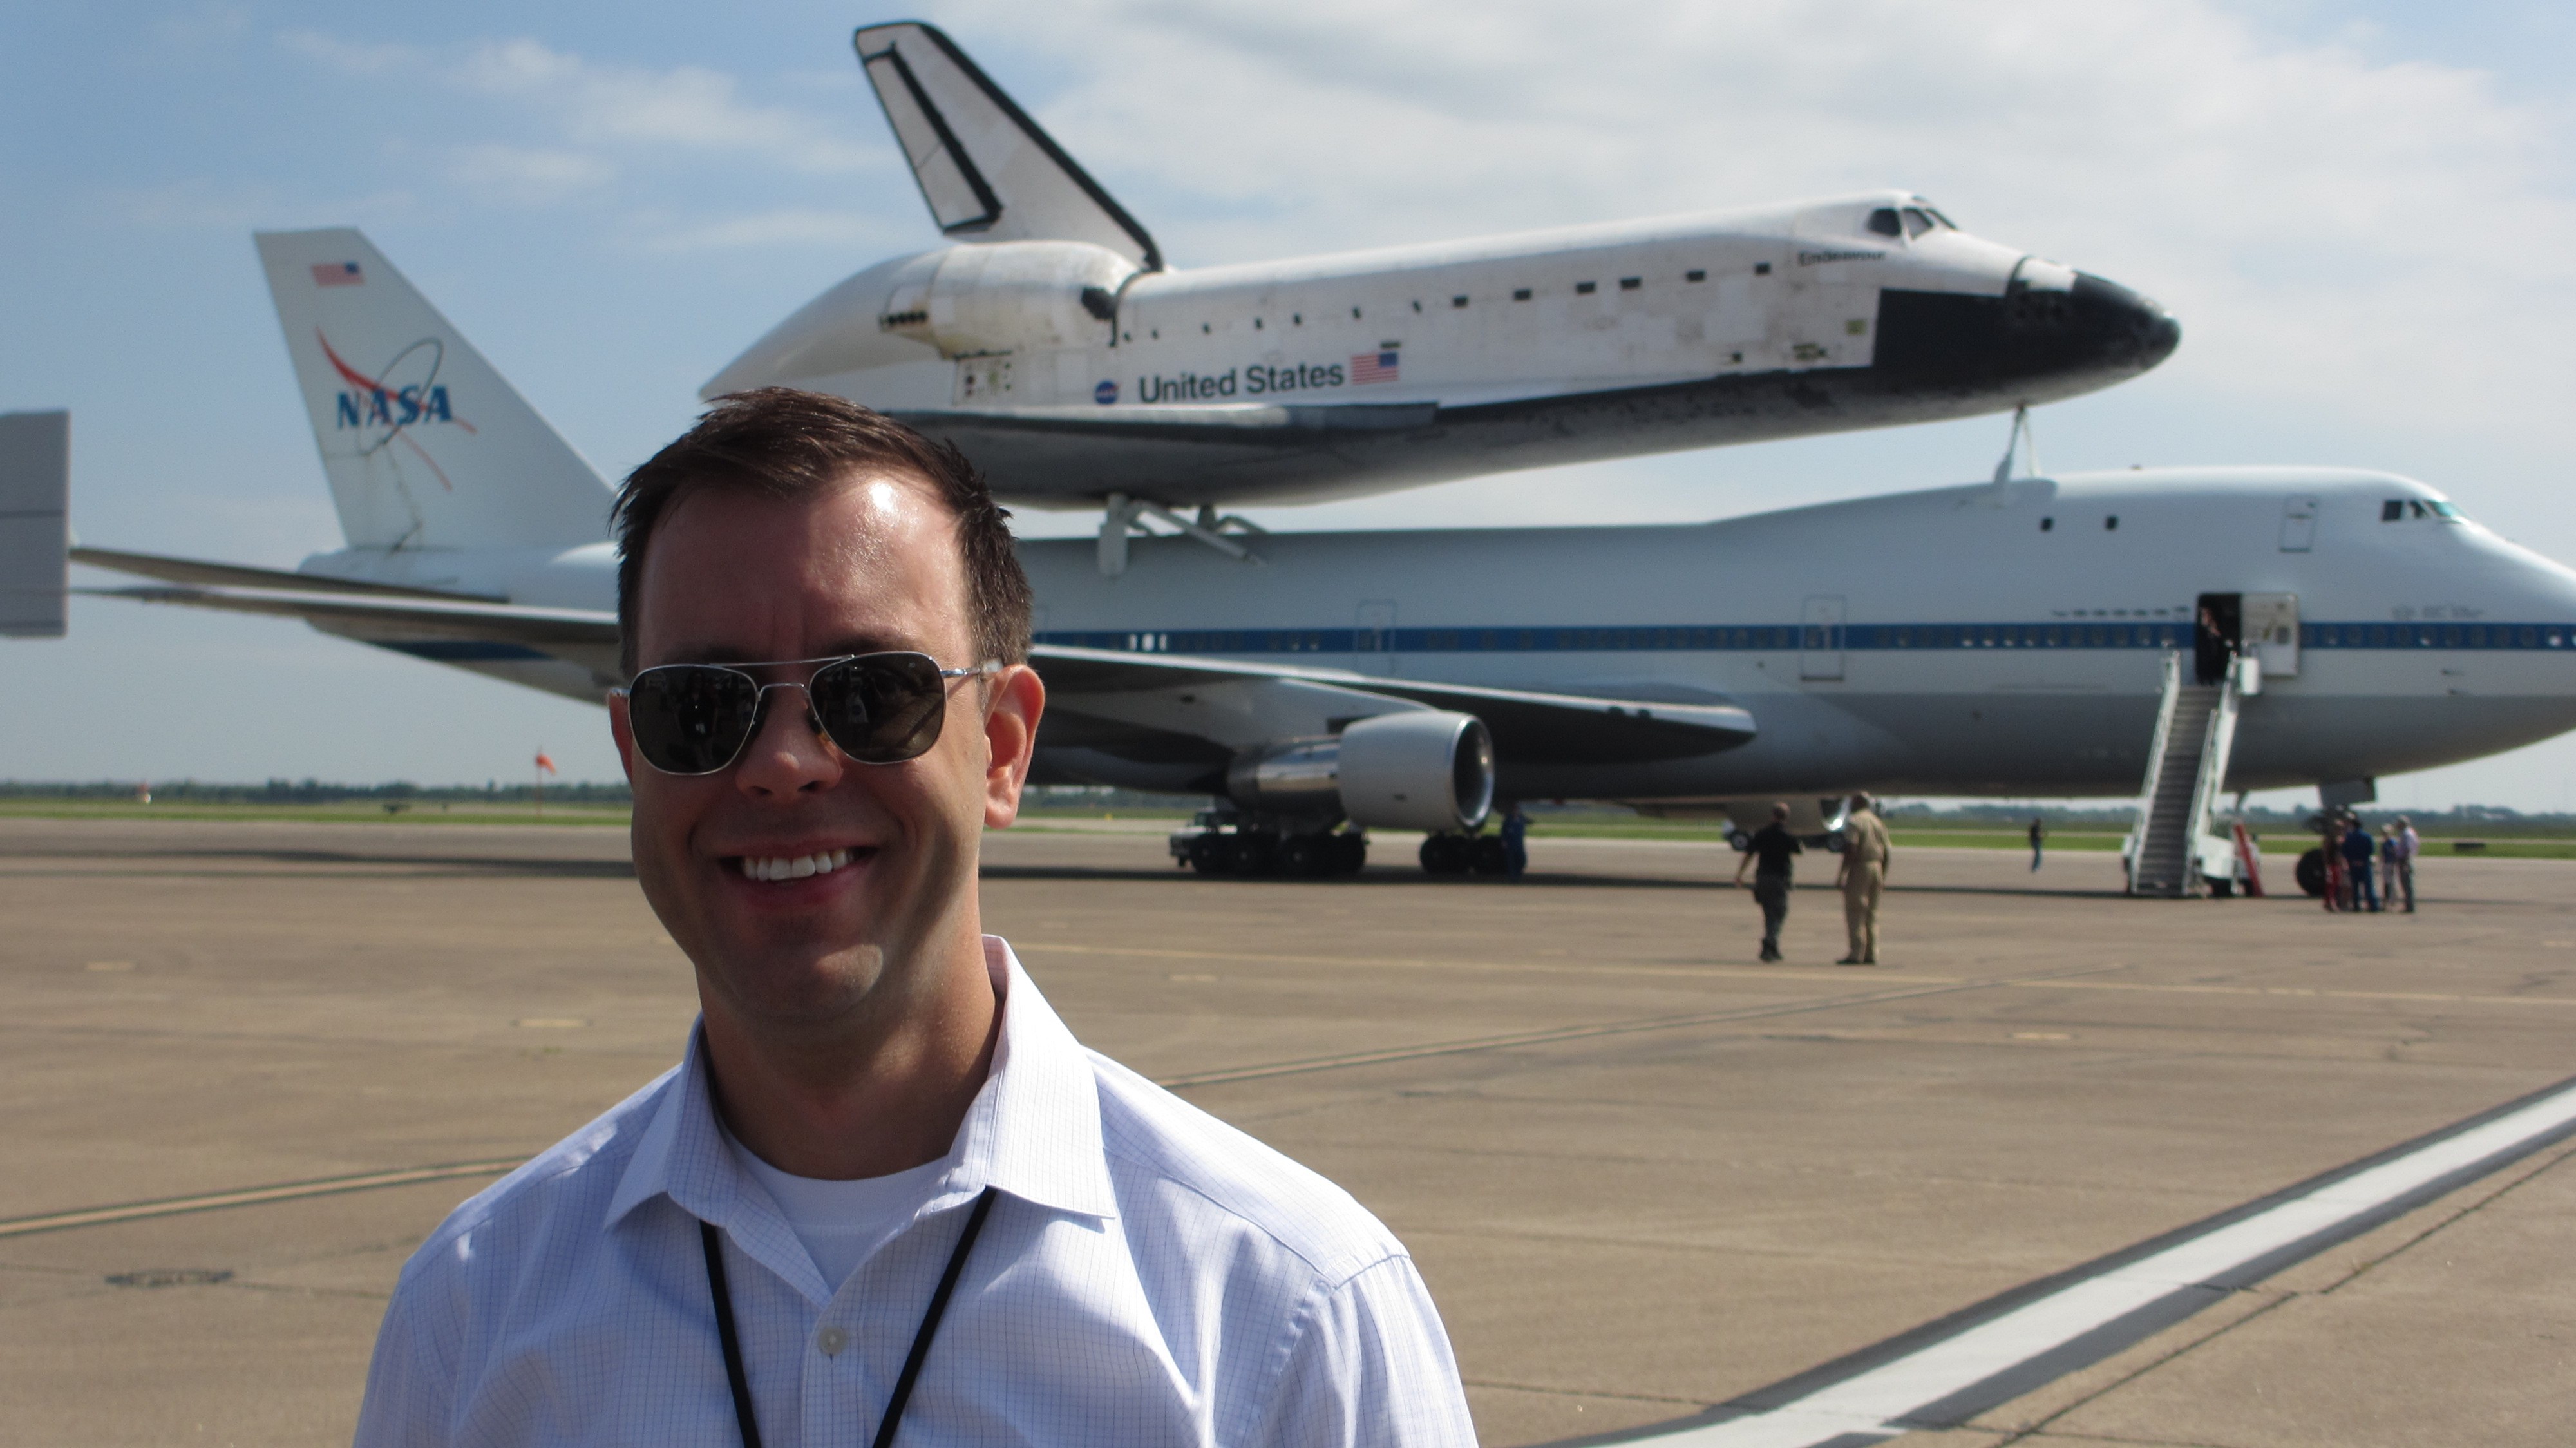 1999 Texas A&amp;M journalism graduate Josh Byerly '99 on the tarmac with the Space Shuttle Endeavour atop a NASA Shuttle Carrier Aircraft in the background